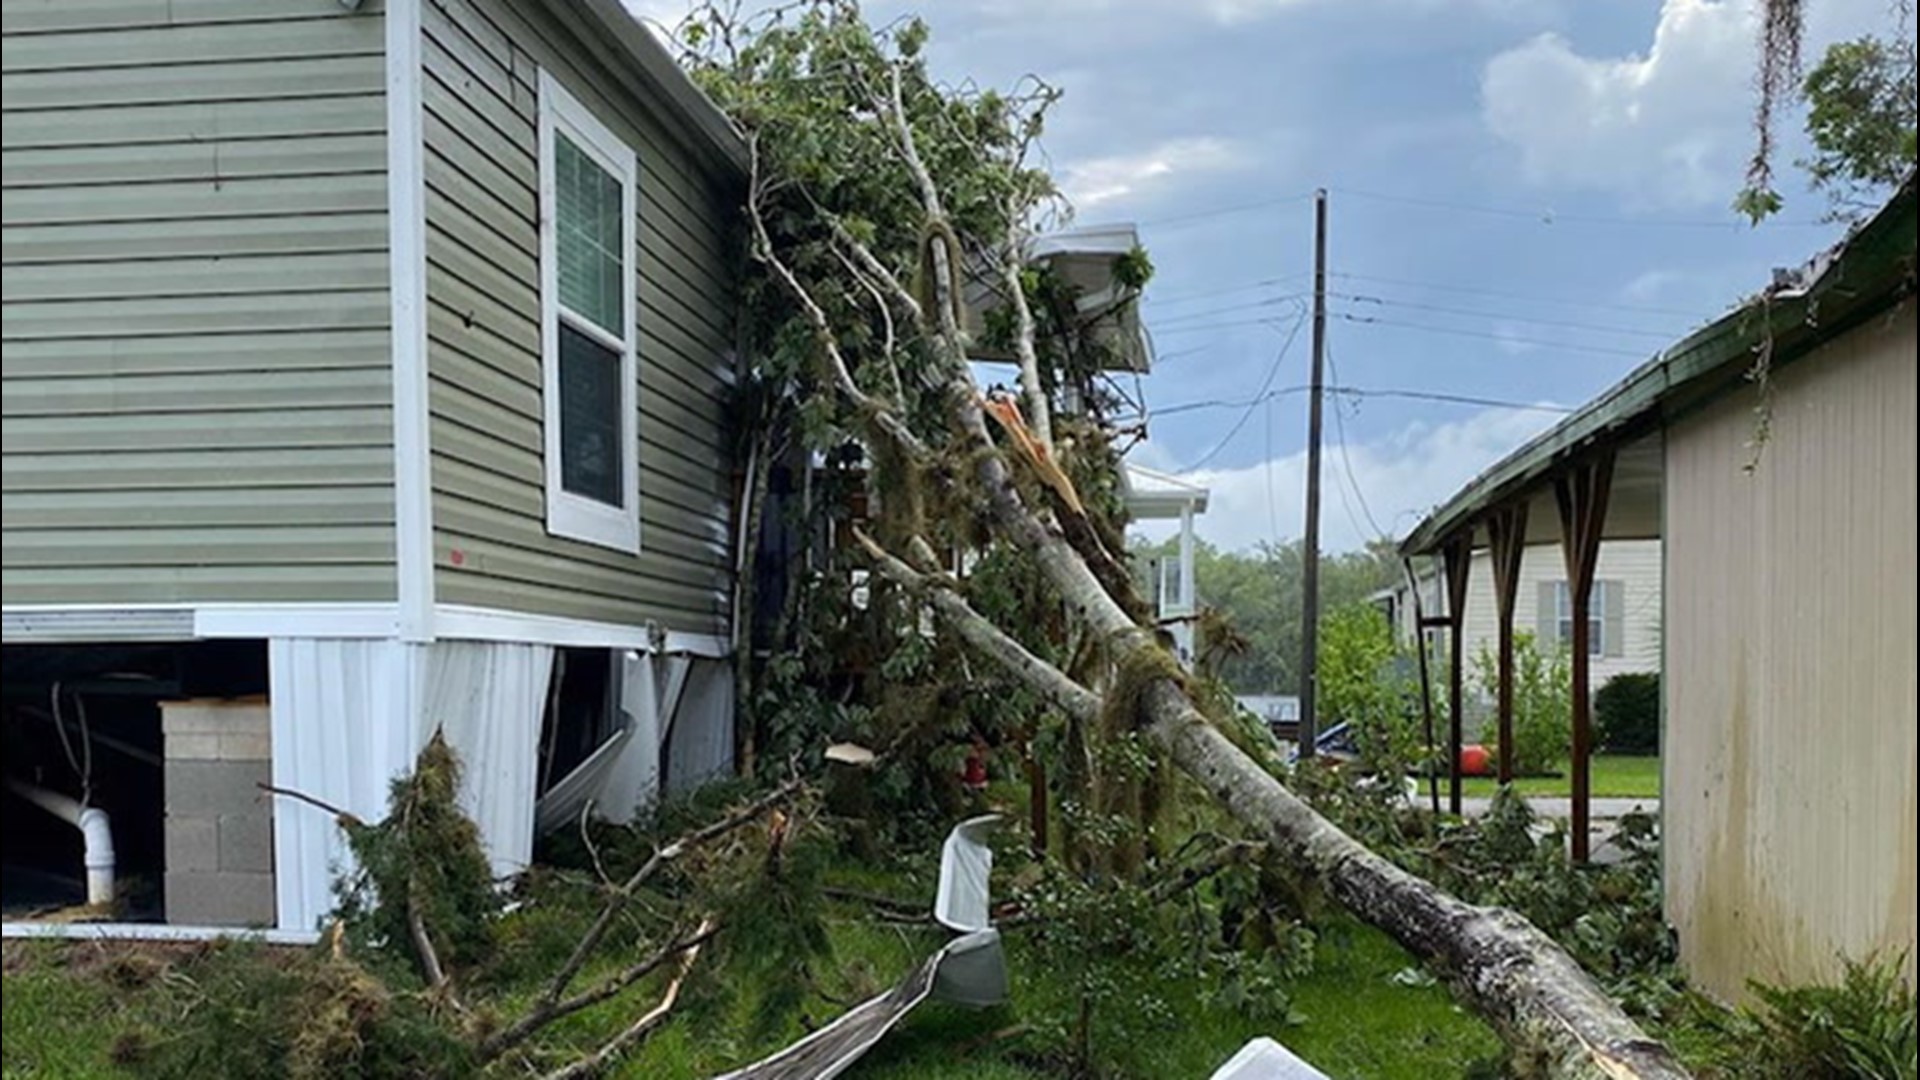 Many homes and trees were damaged in Homosassa, Florida, on April 20, due to a possible tornado that swept through this area.